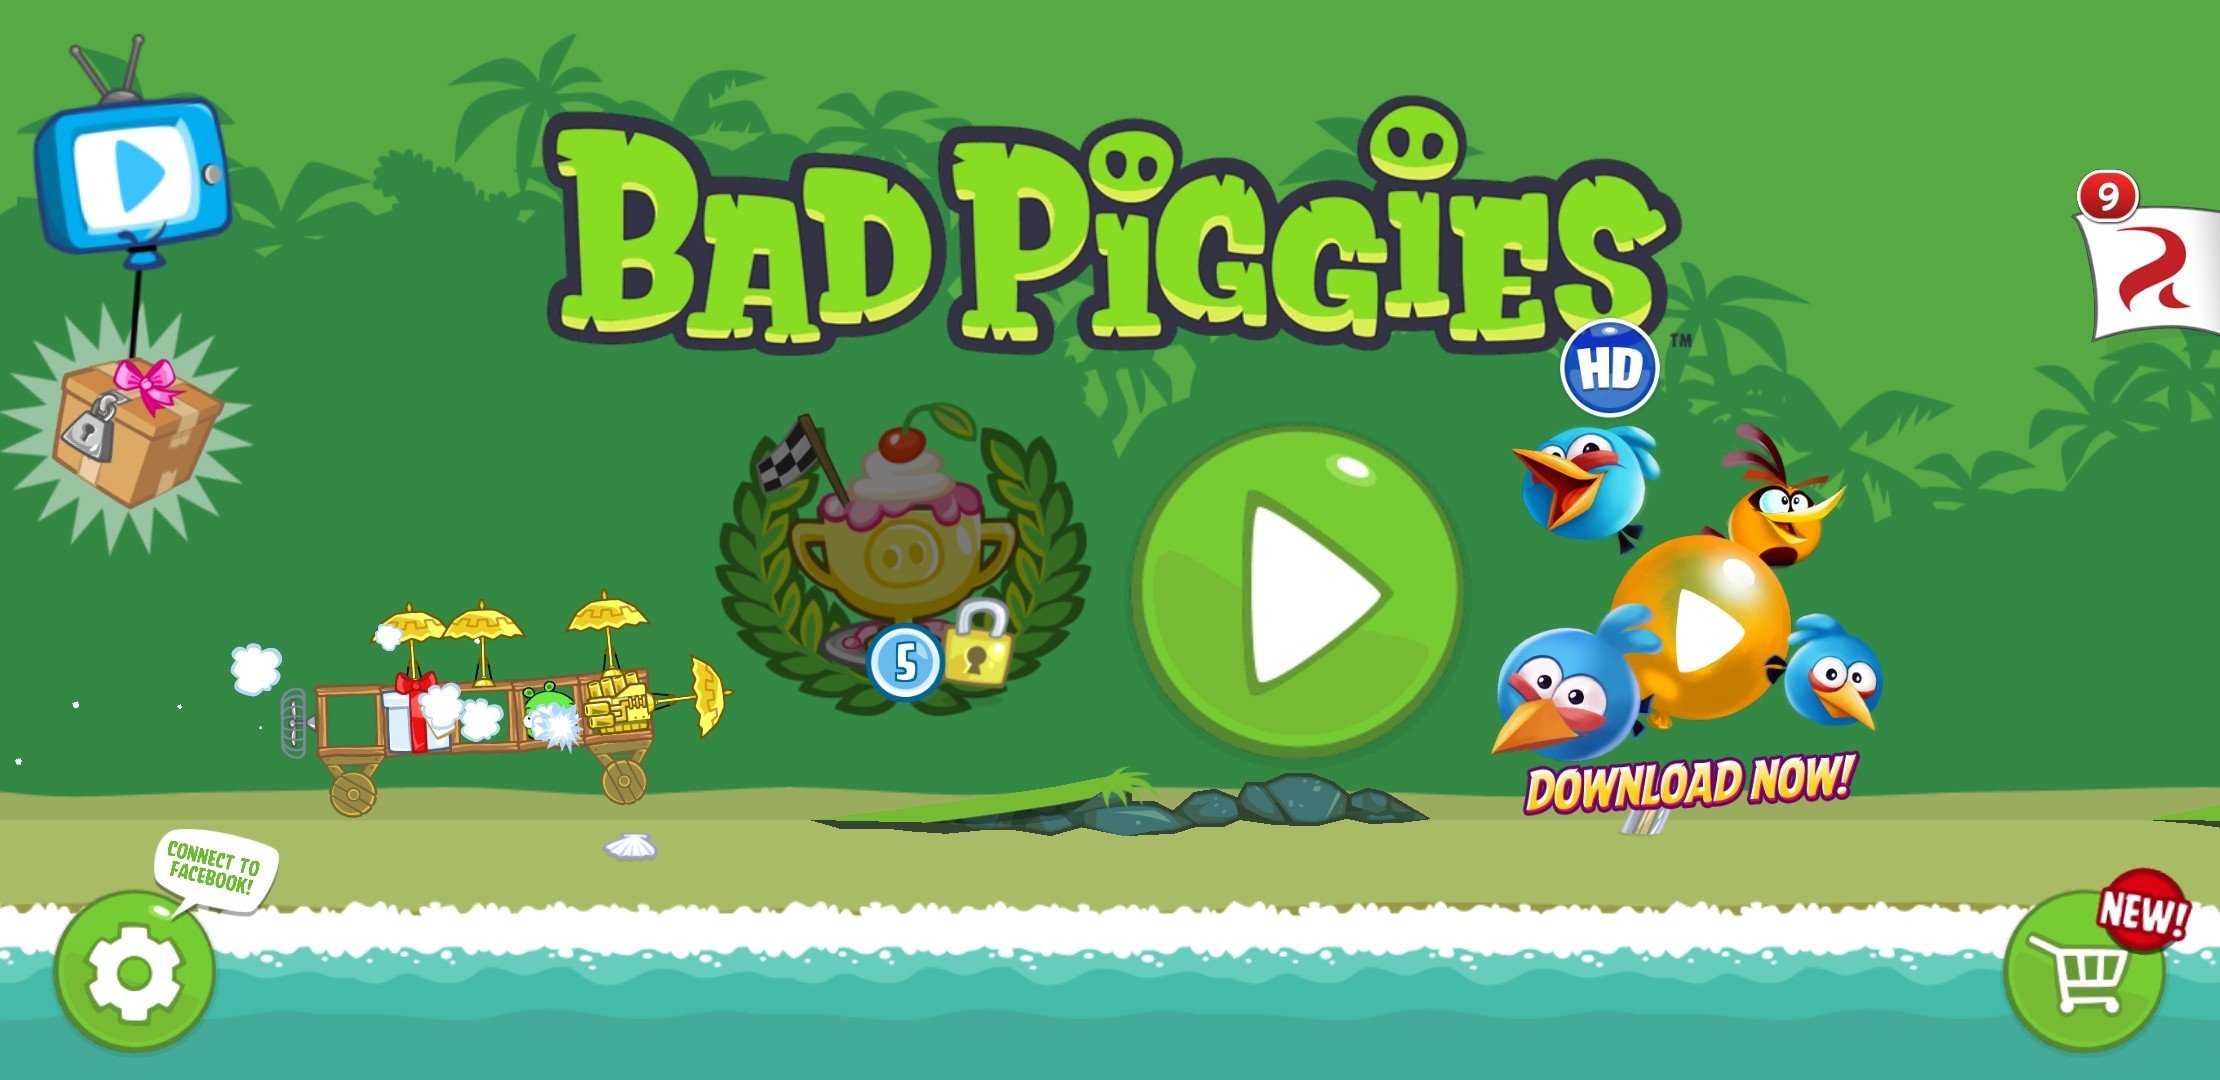 Bad Piggies 2 Free Download For Mobile